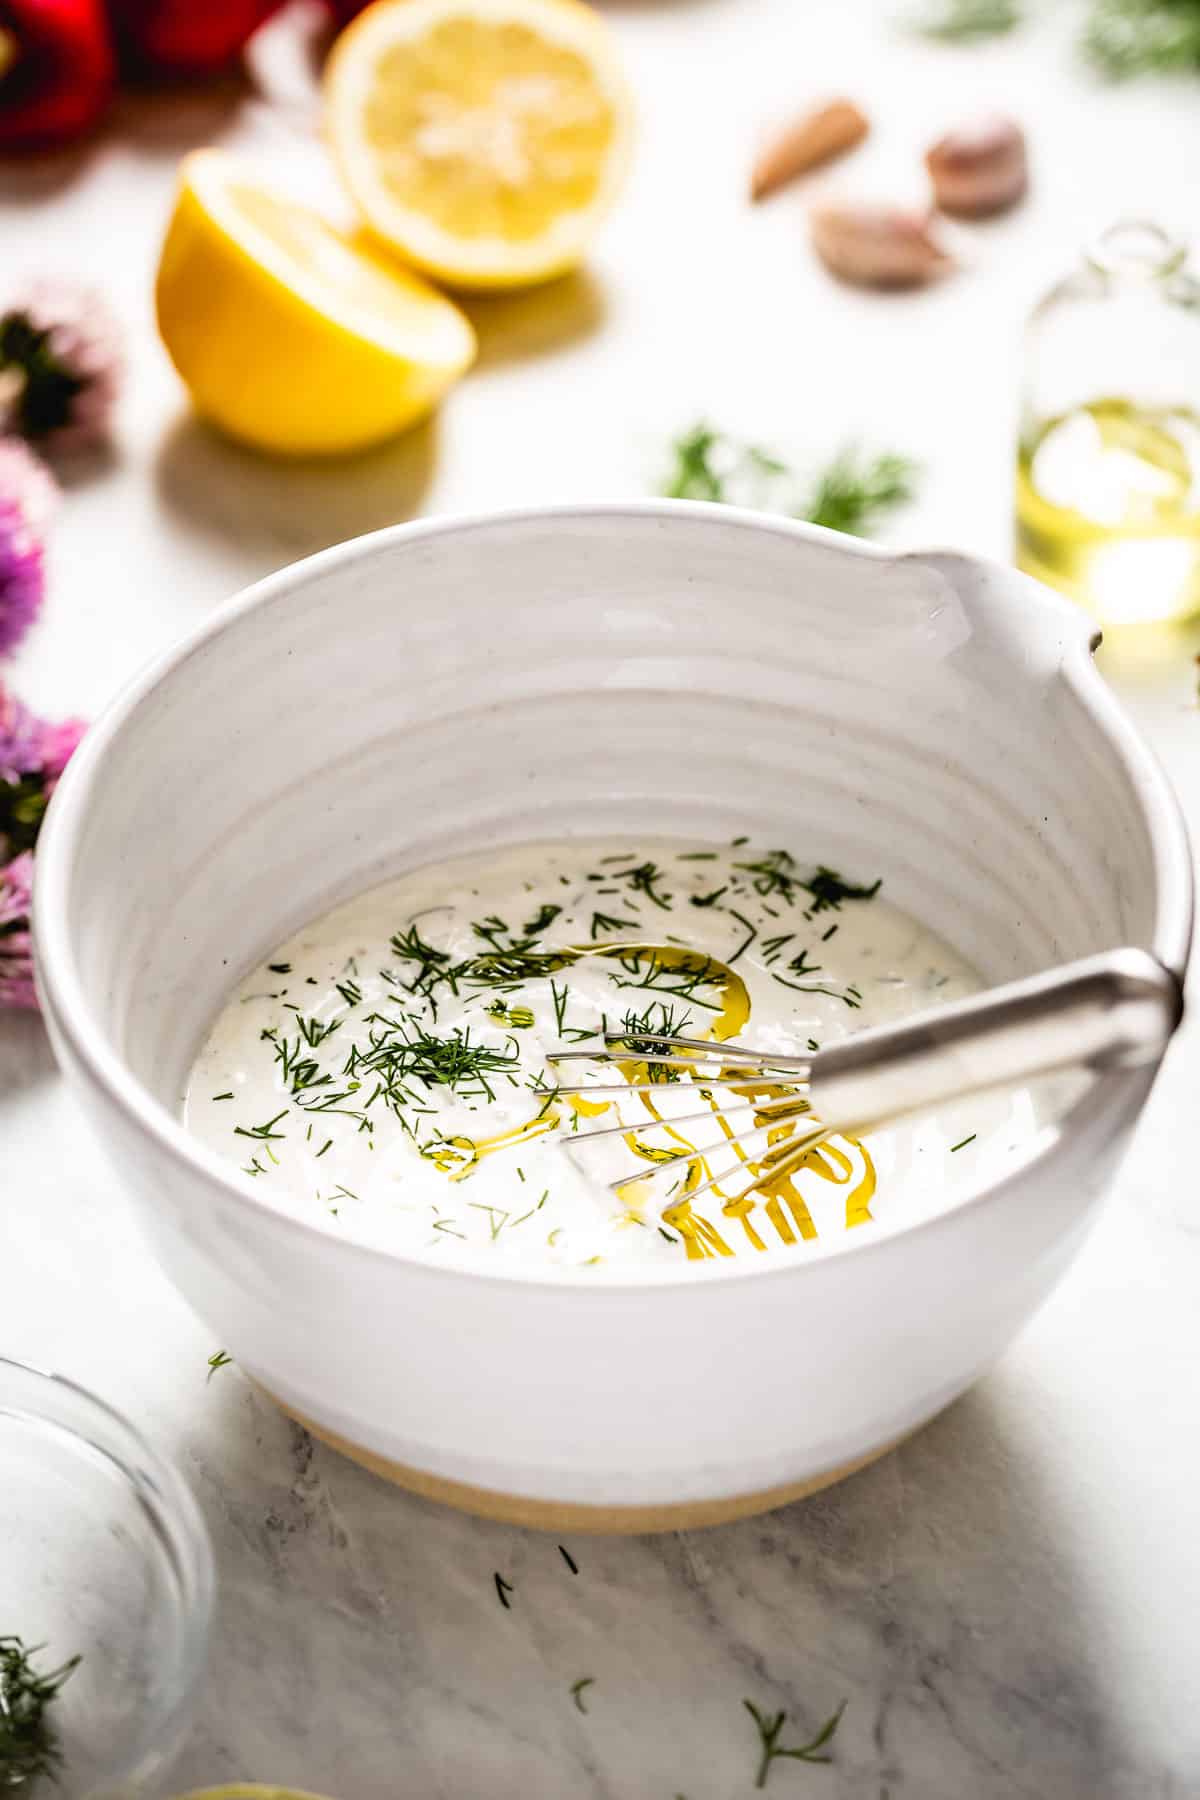 Yogurt sauce for salad in a bowl with a whisk.